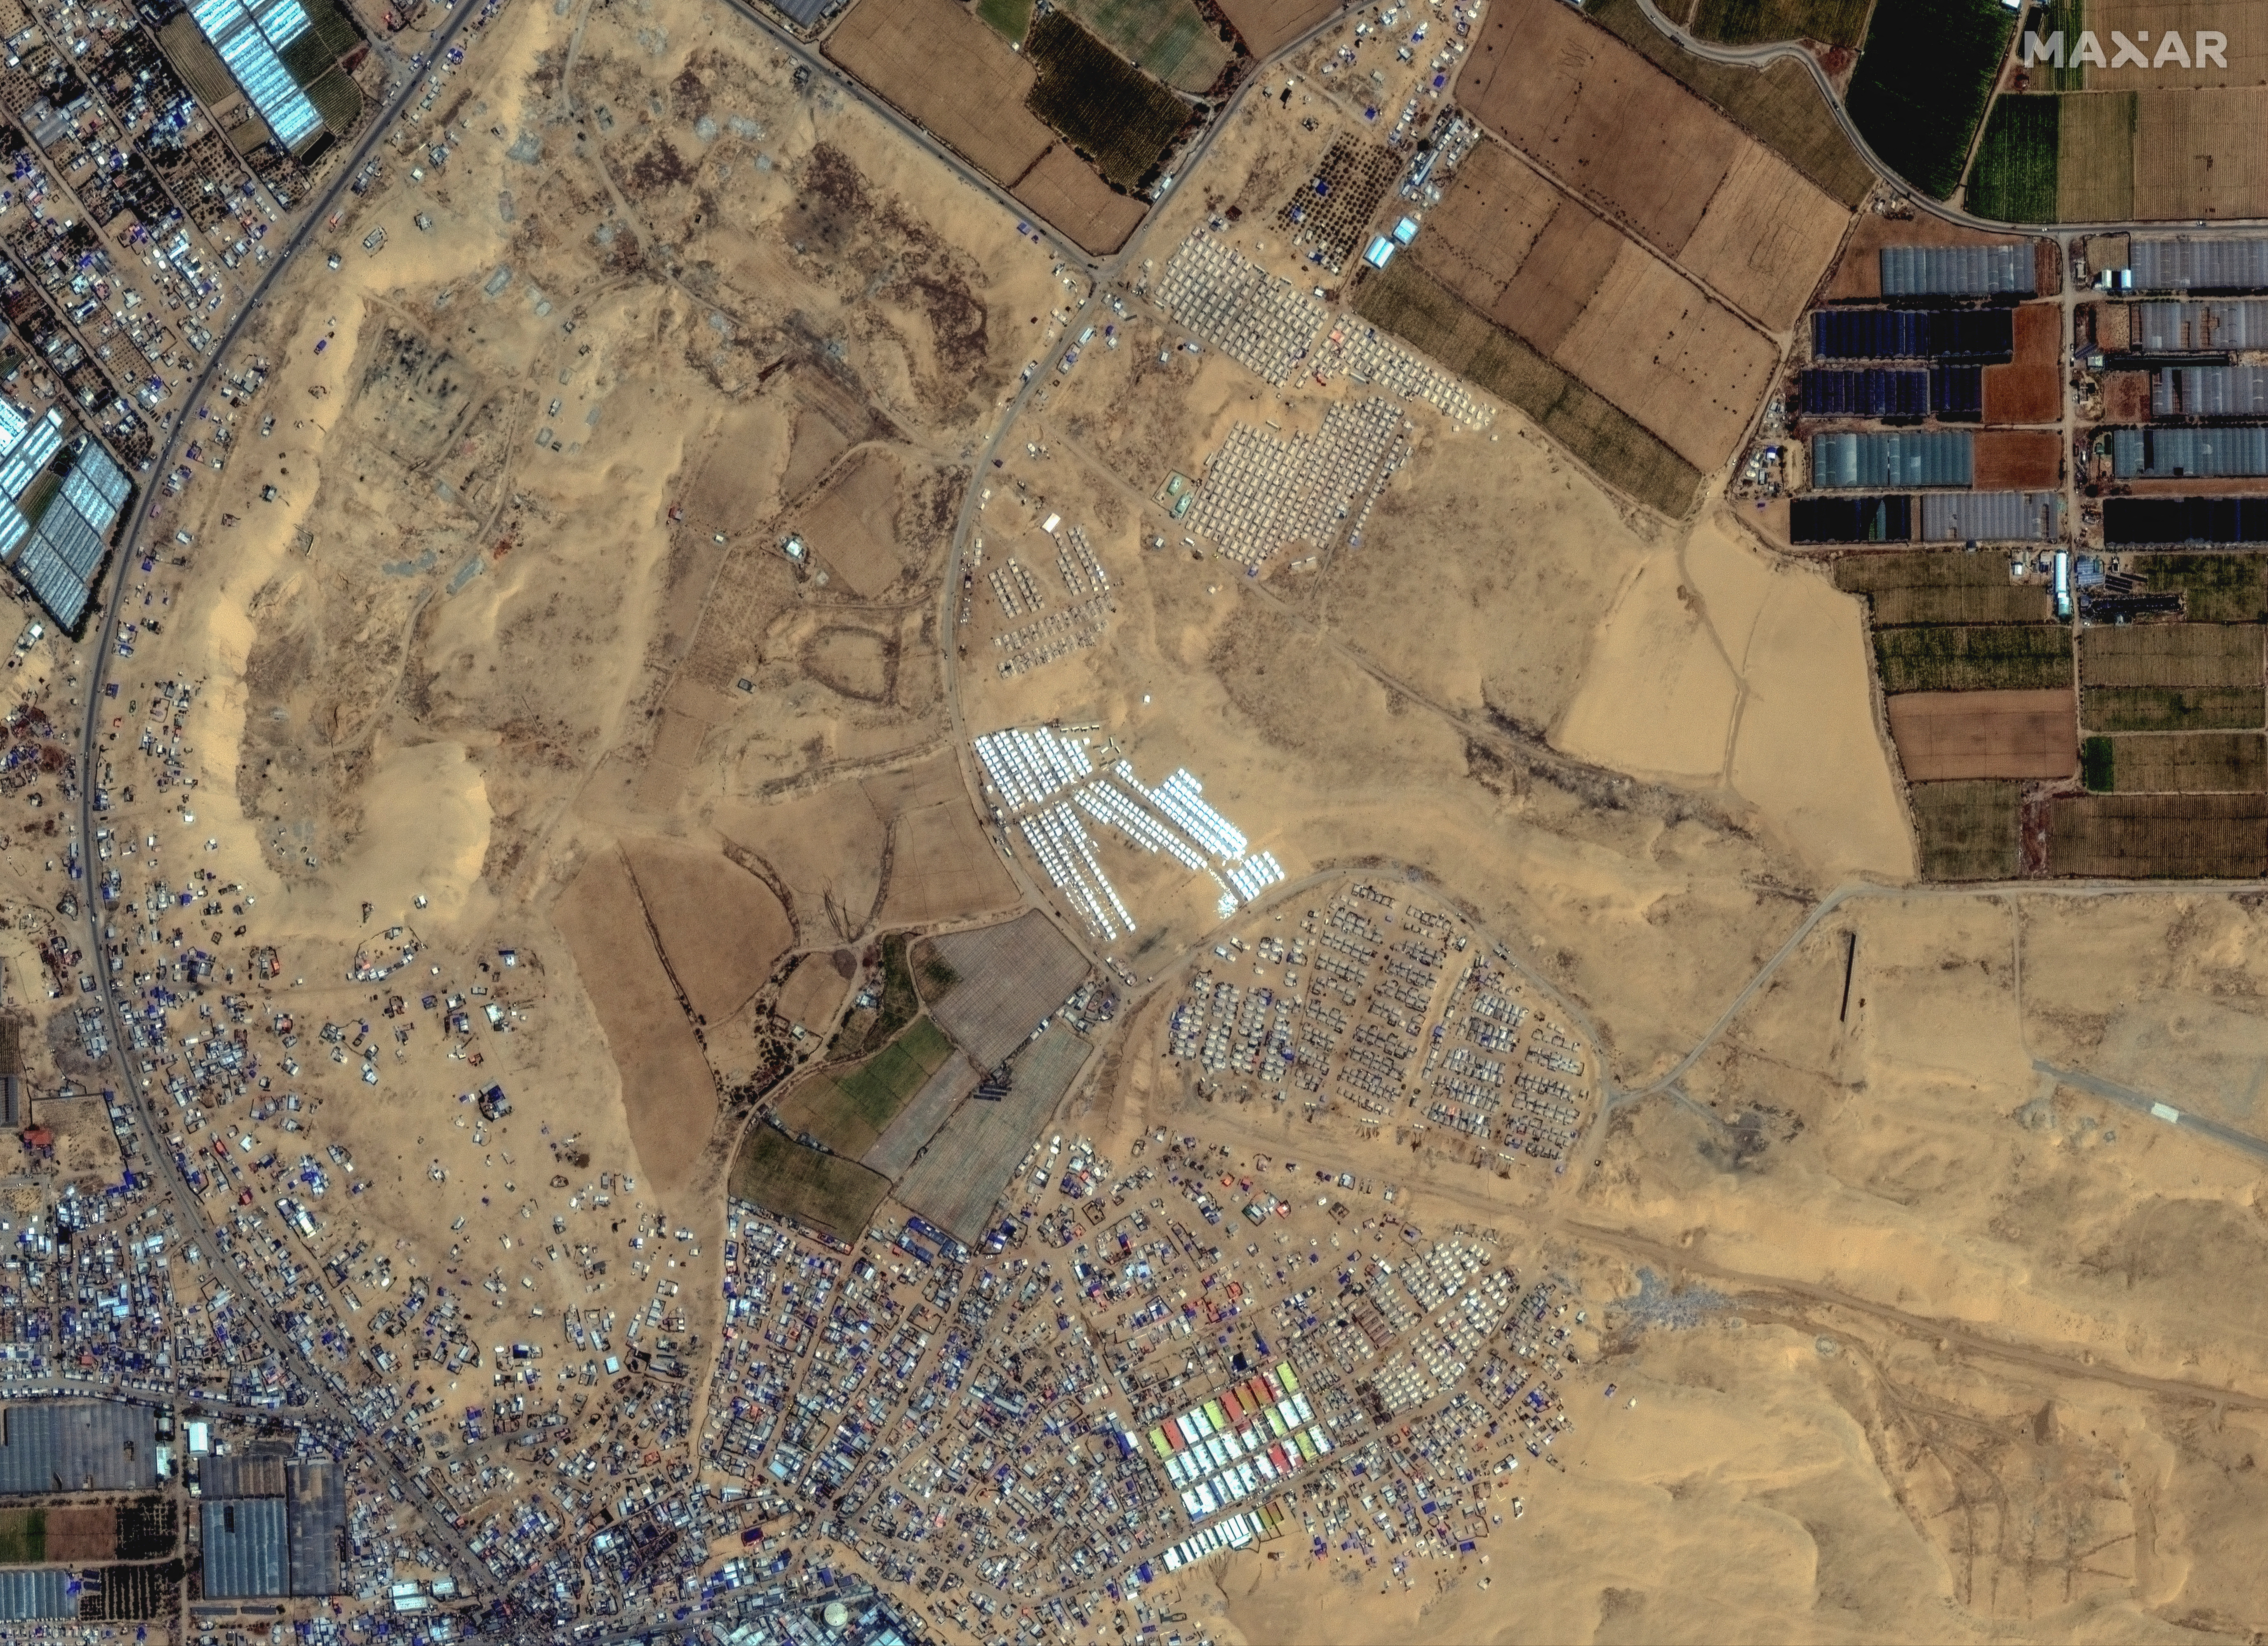 A satellite image shows an overview of a tent camp settlement near Rafah